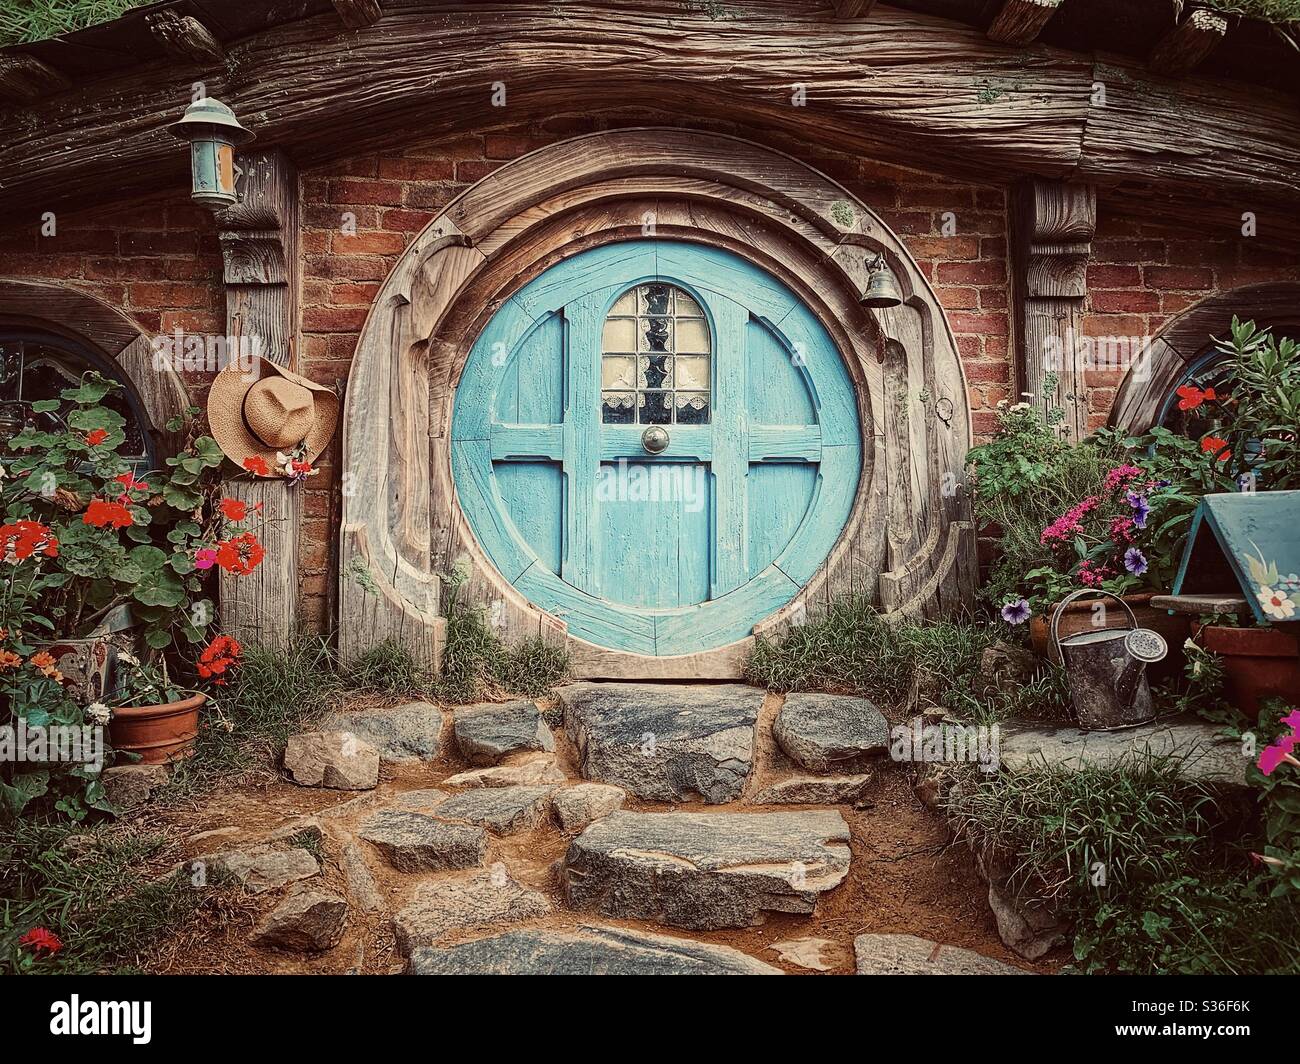 Hobbiton. Bucolic place in New Zealand where the hobbits from the Middle Earth live. Lord of the rings movie set. Blue round shape door Stock Photo